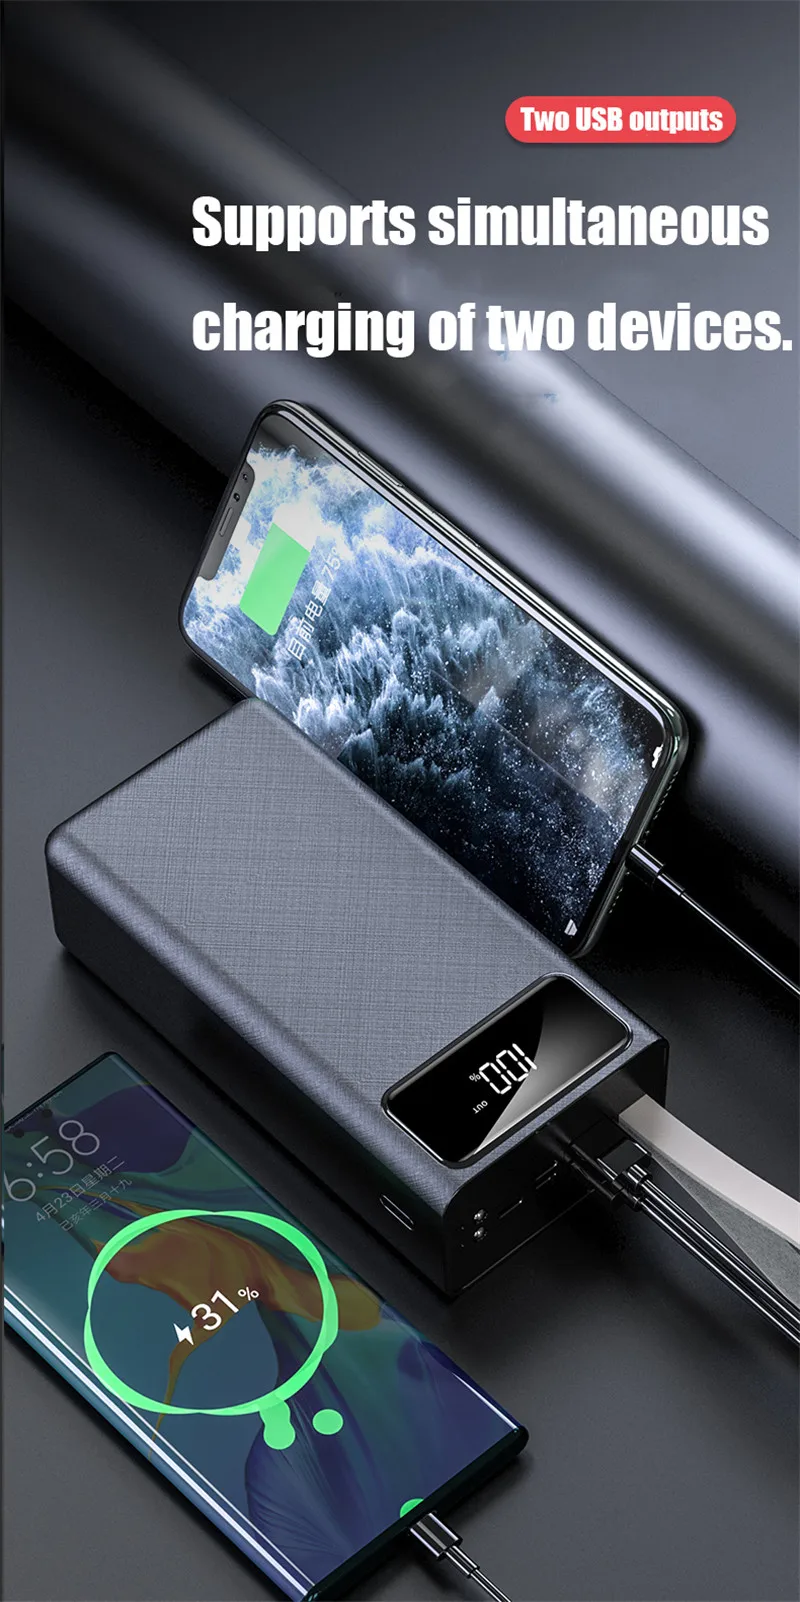 fast charging 3 0 80000mah power bank usb pd power bank portable external battery charger for iphone and android free global shipping